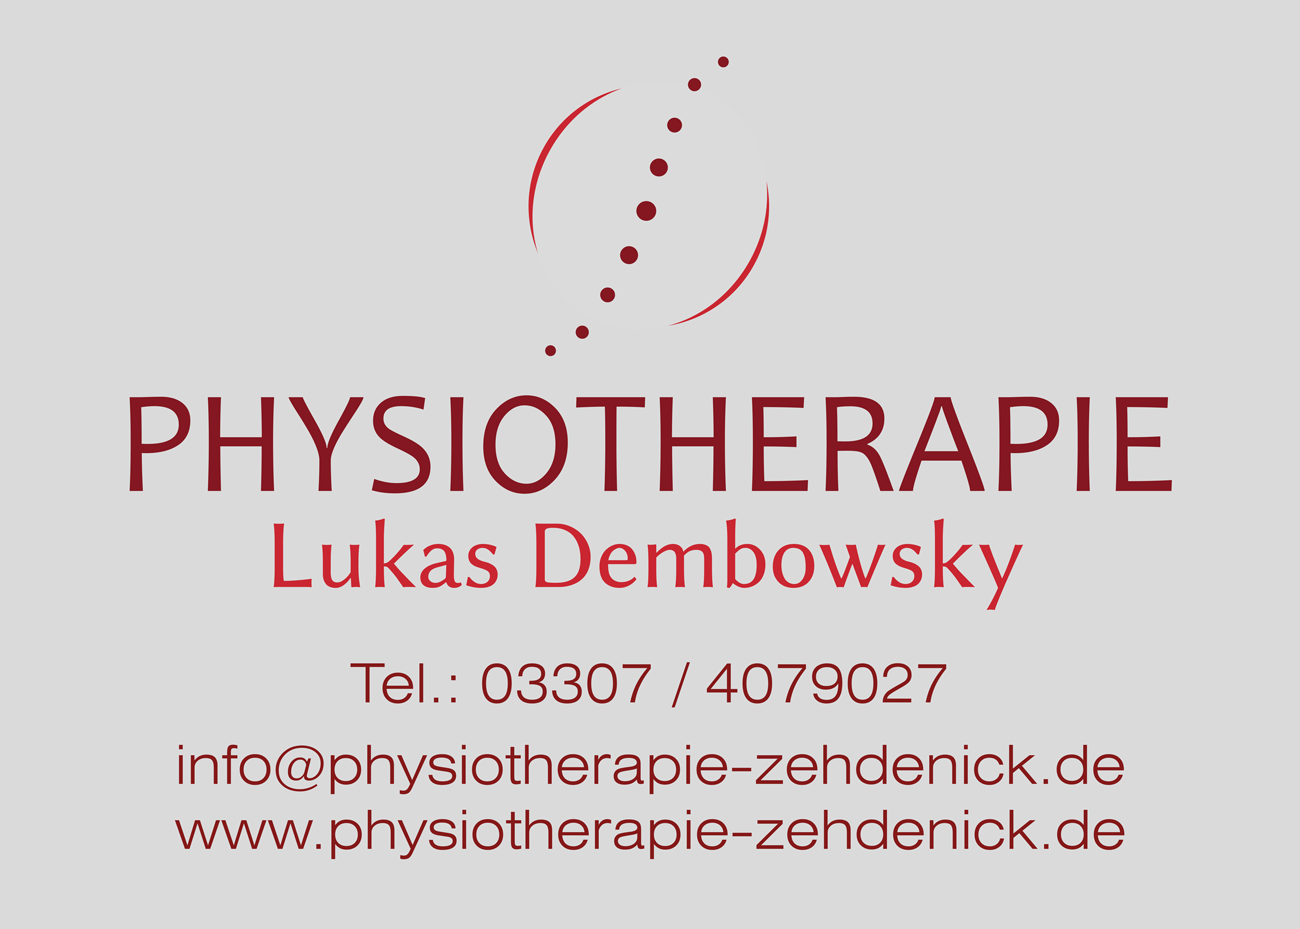 Physiotherapie in Zehdenick - Lukas Dembowsky